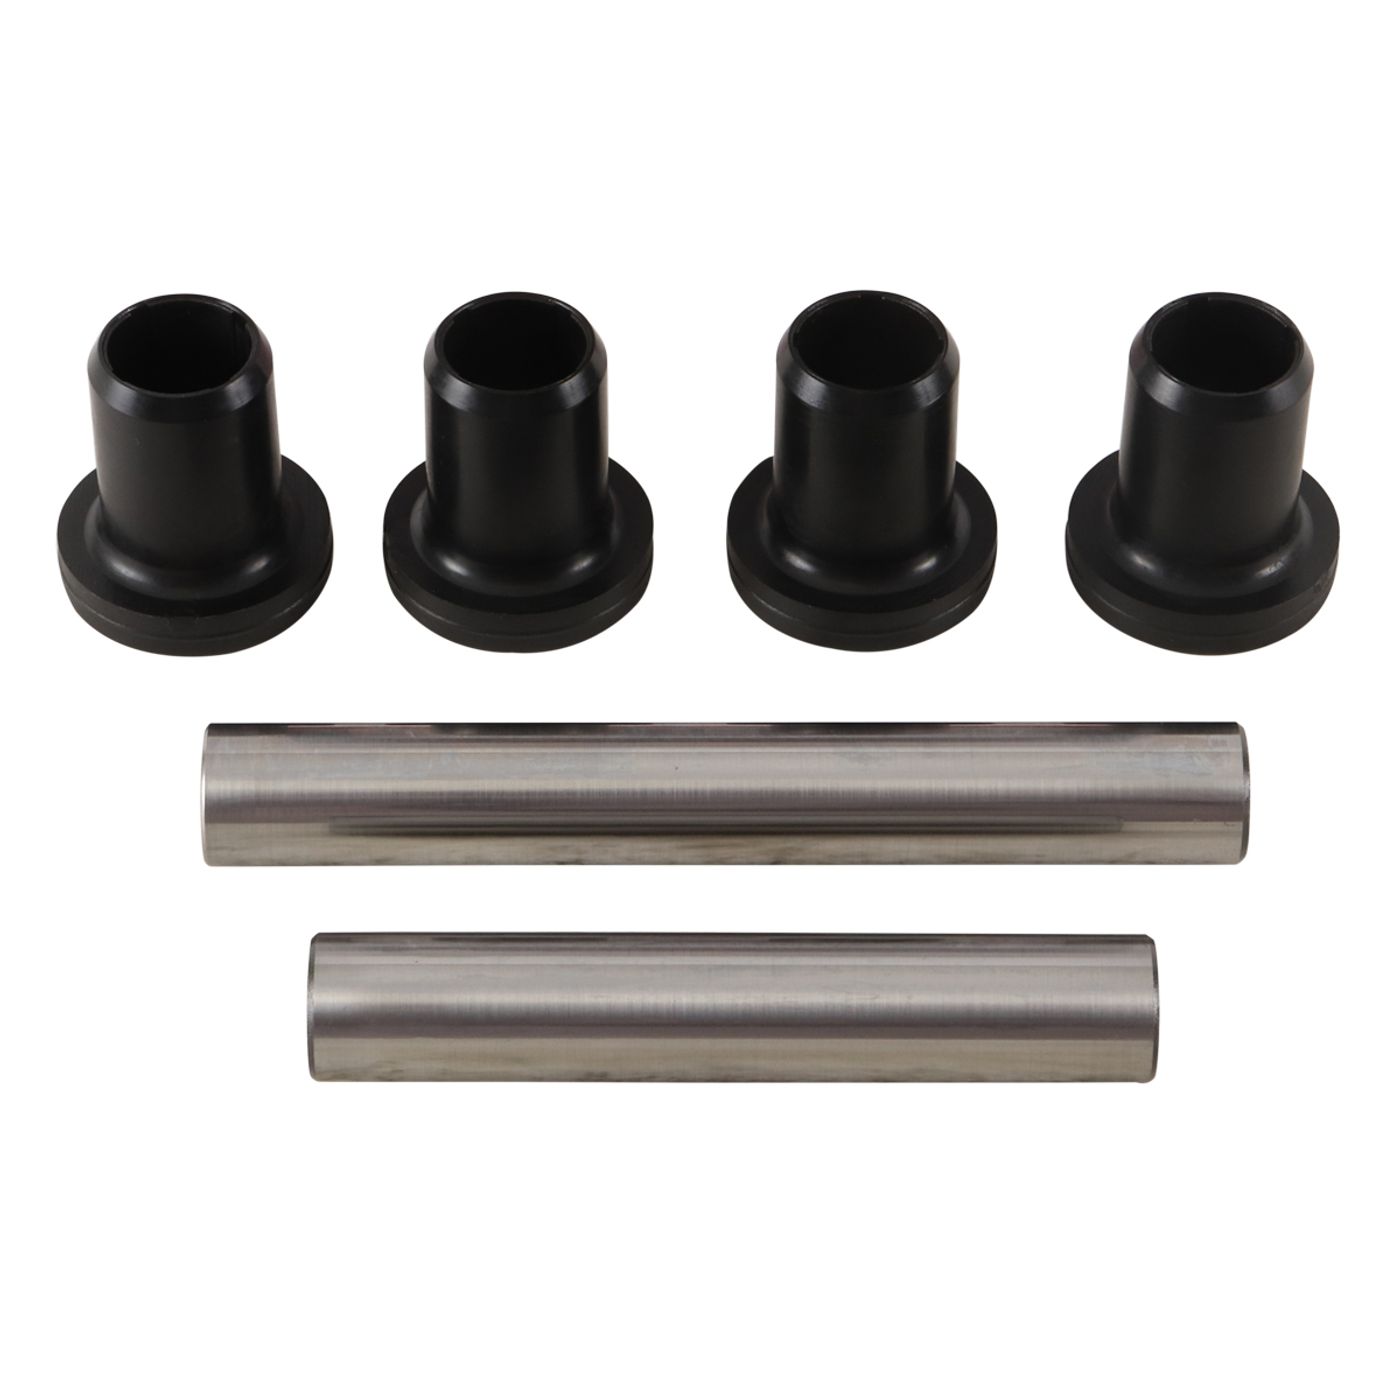 Wrp Rear Ind. Suspension Kits - WRP501218 image